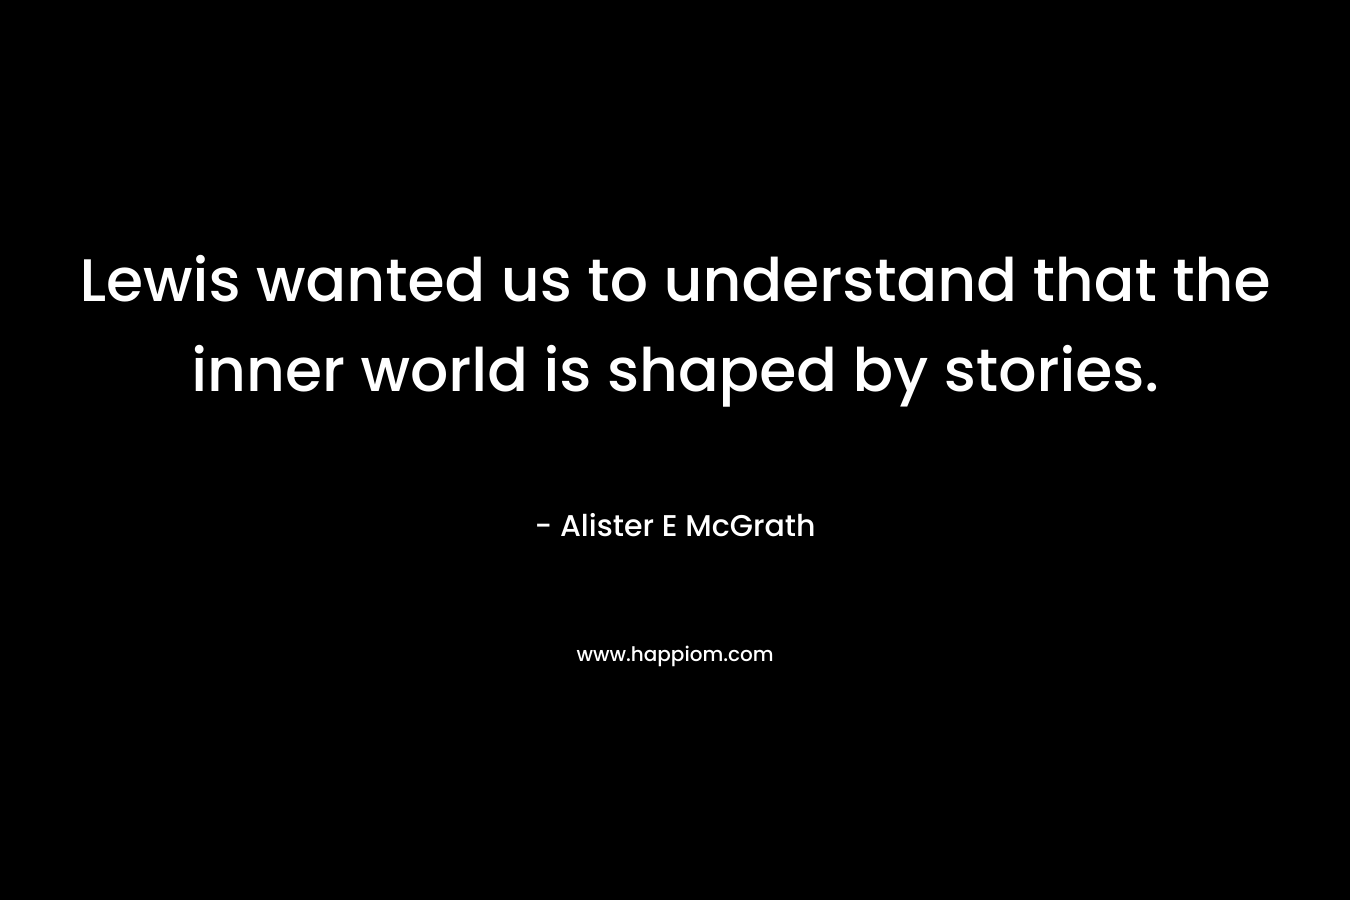 Lewis wanted us to understand that the inner world is shaped by stories.